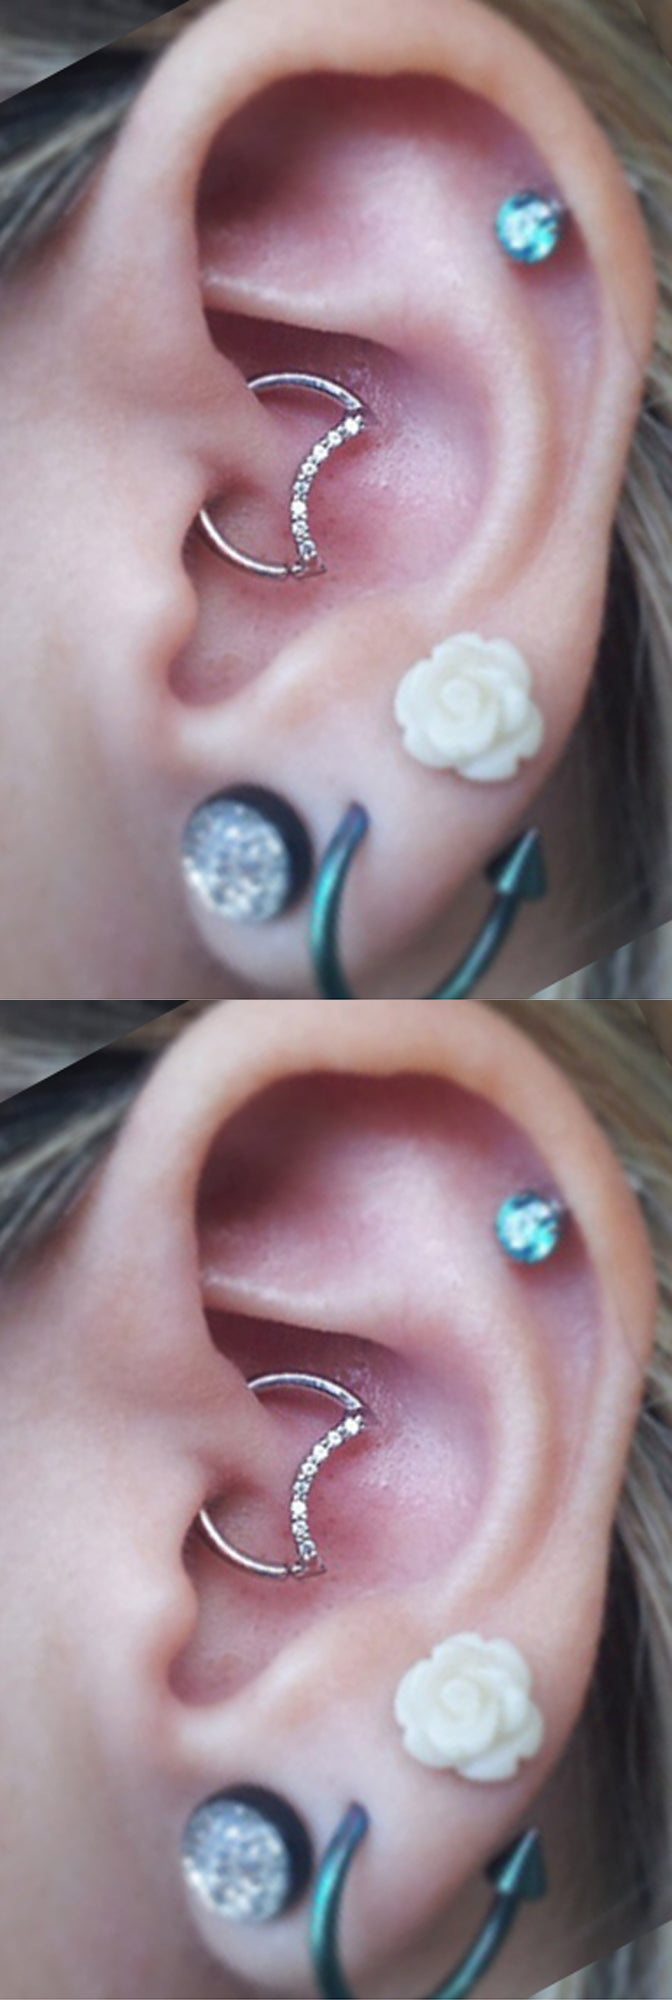 20 Ear Piercing Ideas that will have 